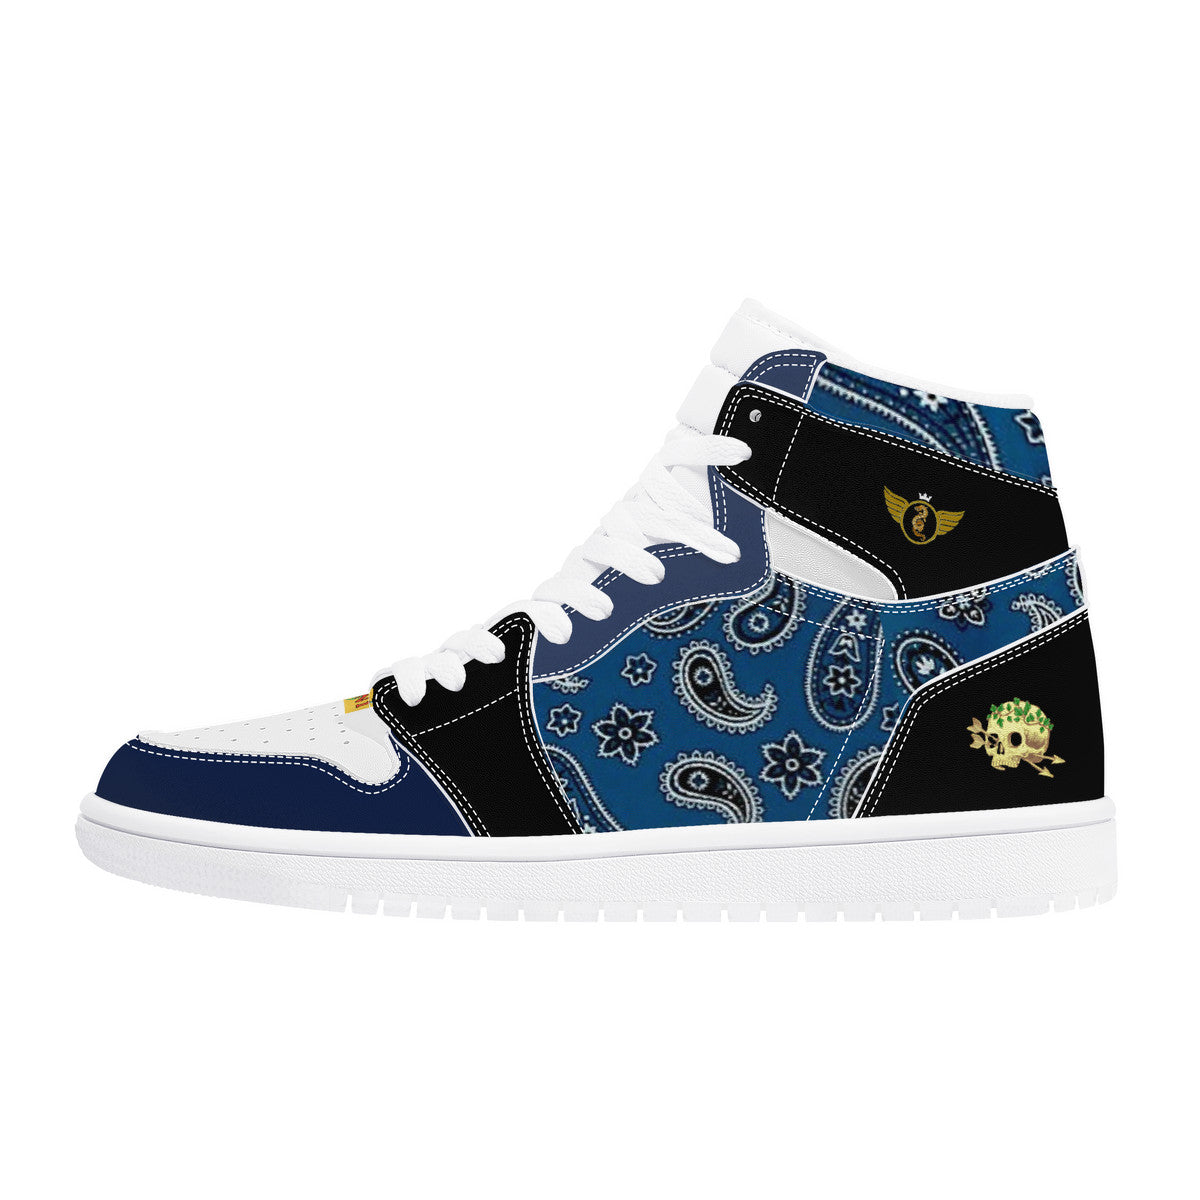 Paisley Gold Custom High Top Blue and Black Sneakers - Shoe Zero